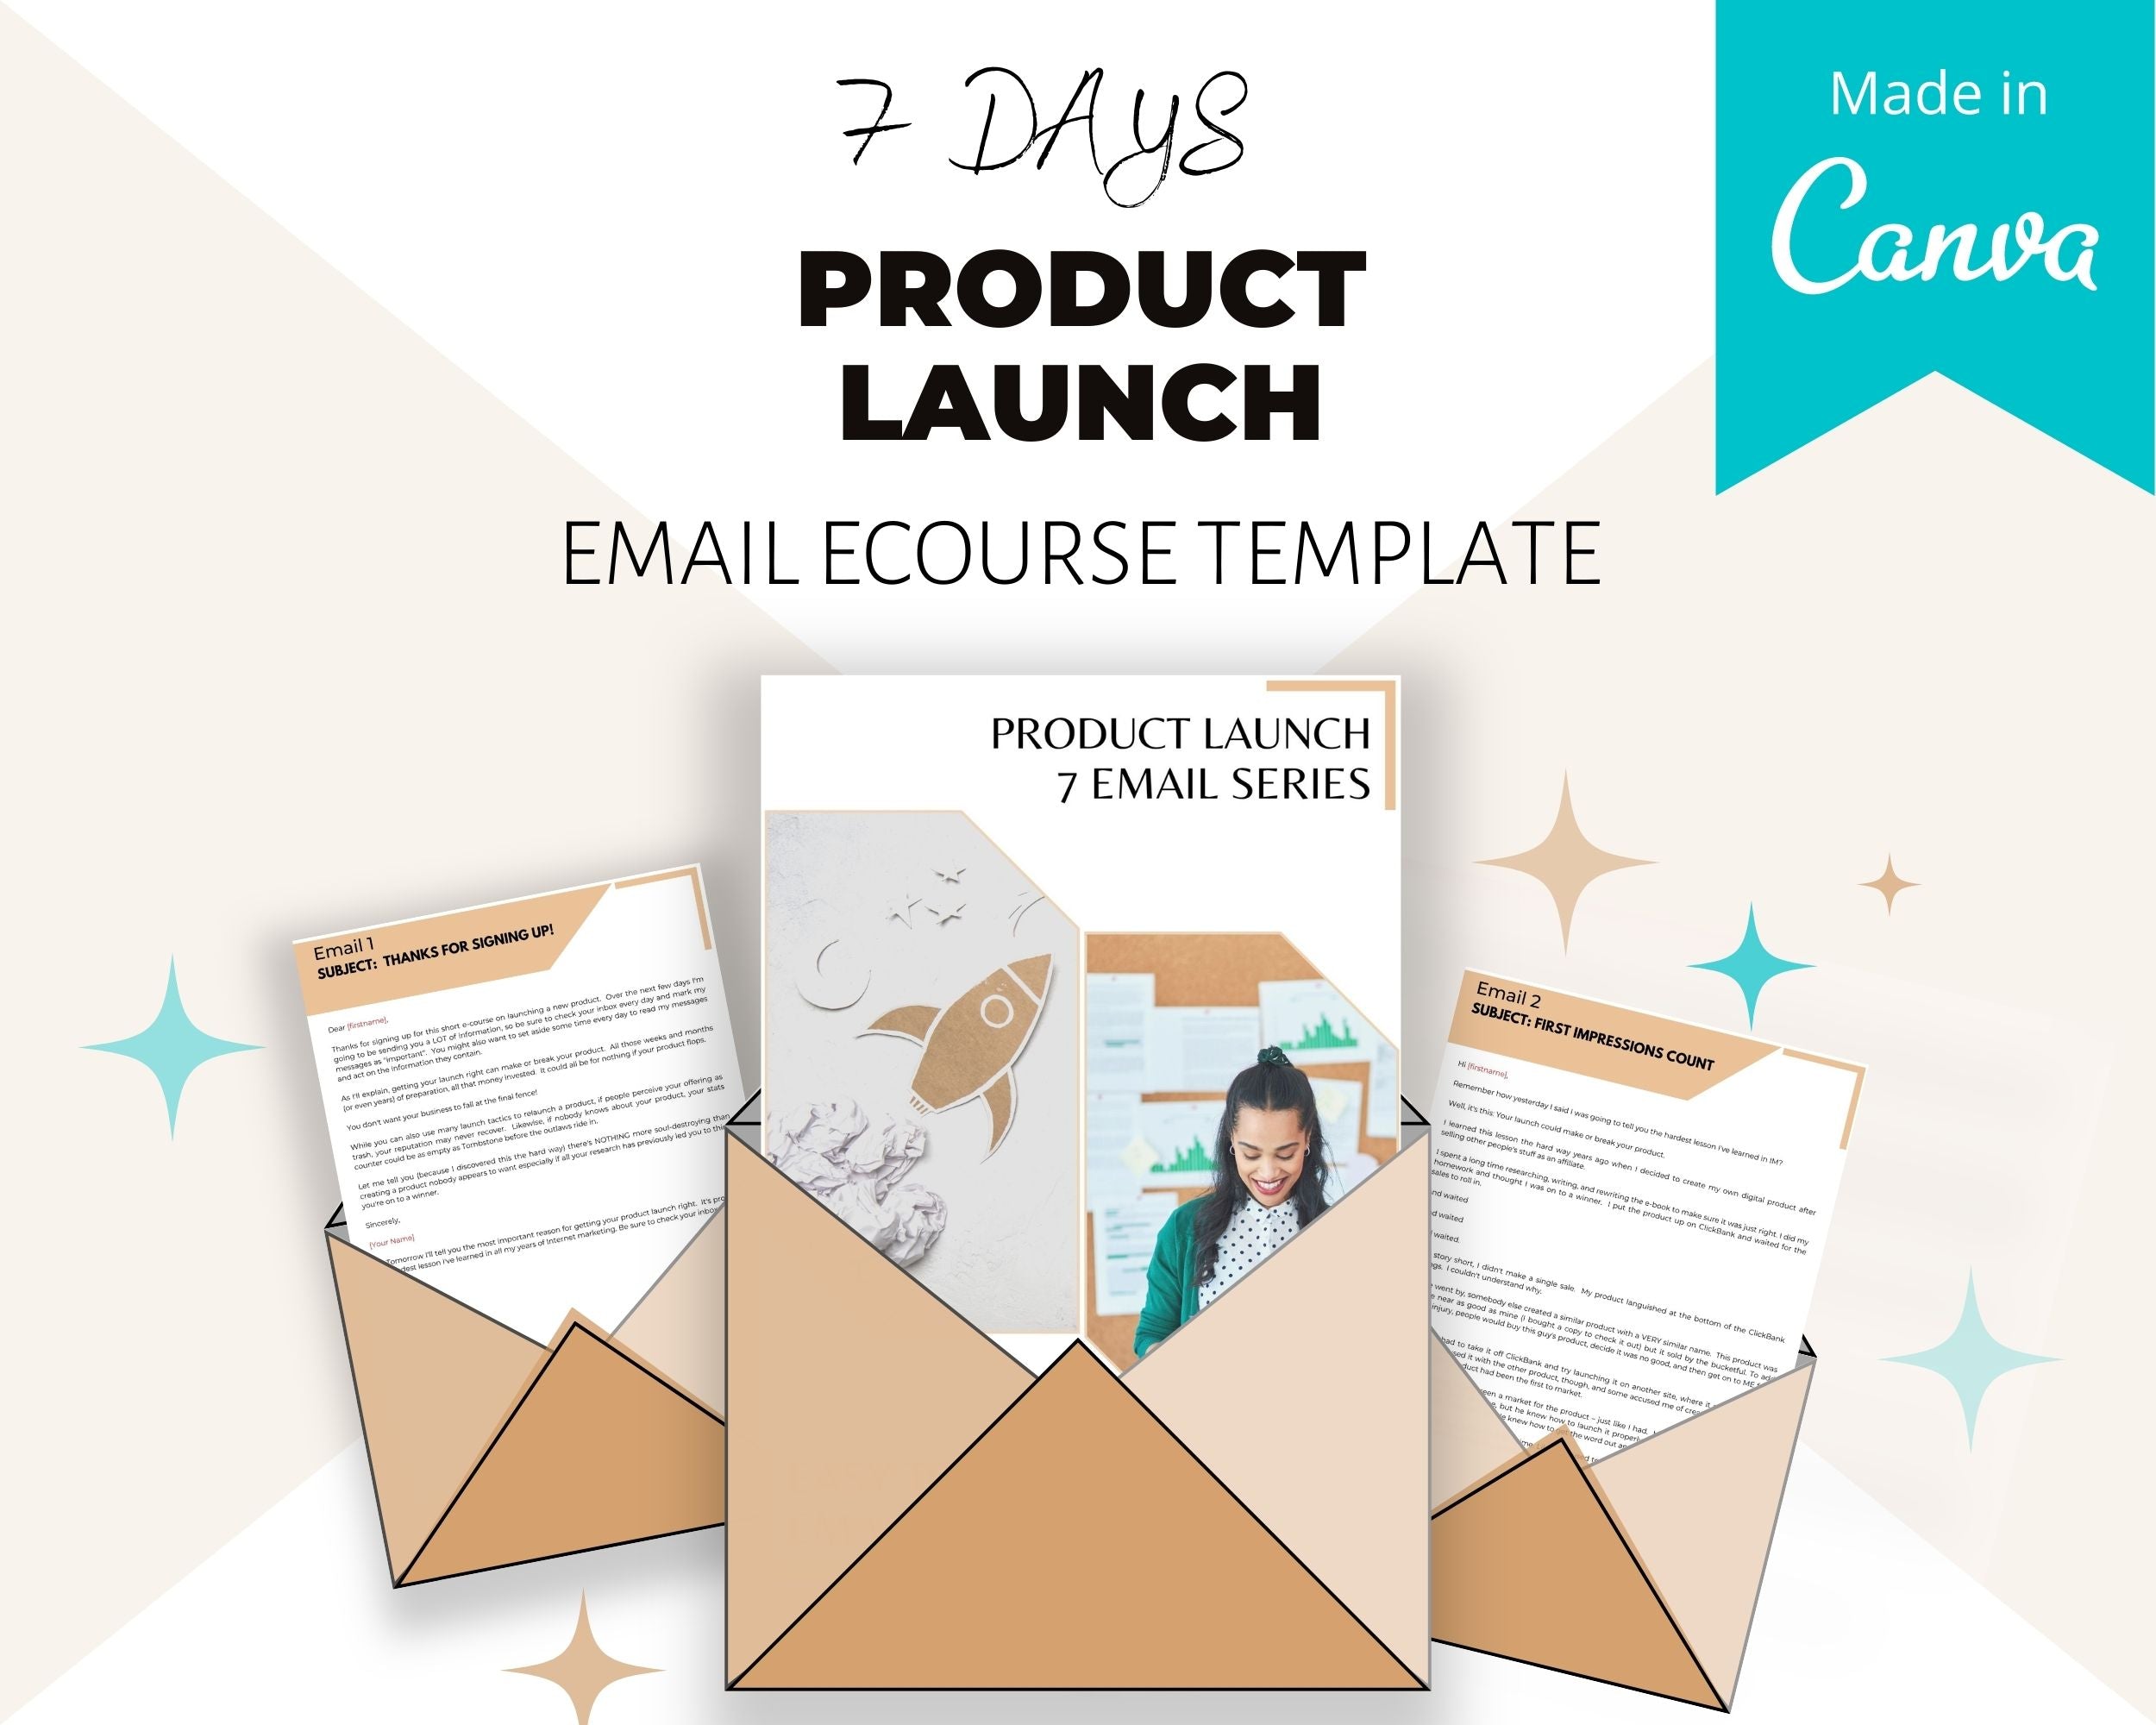 Editable Product Launch Emails | Done-for-You eCourse | Rebrandable Newsletter